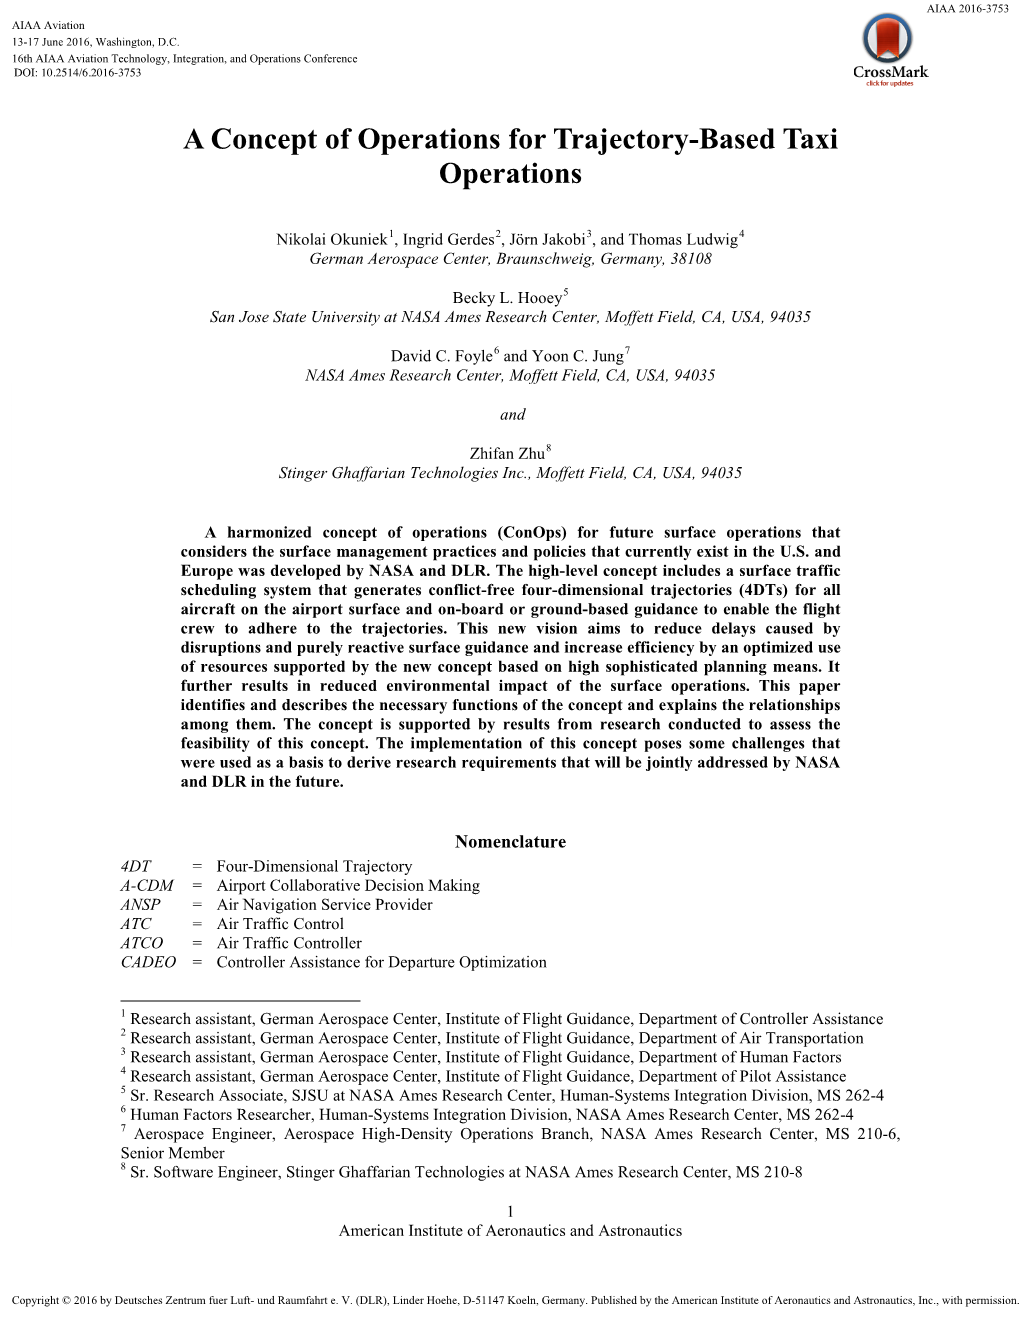 A Concept of Operations for Trajectory-Based Taxi Operations